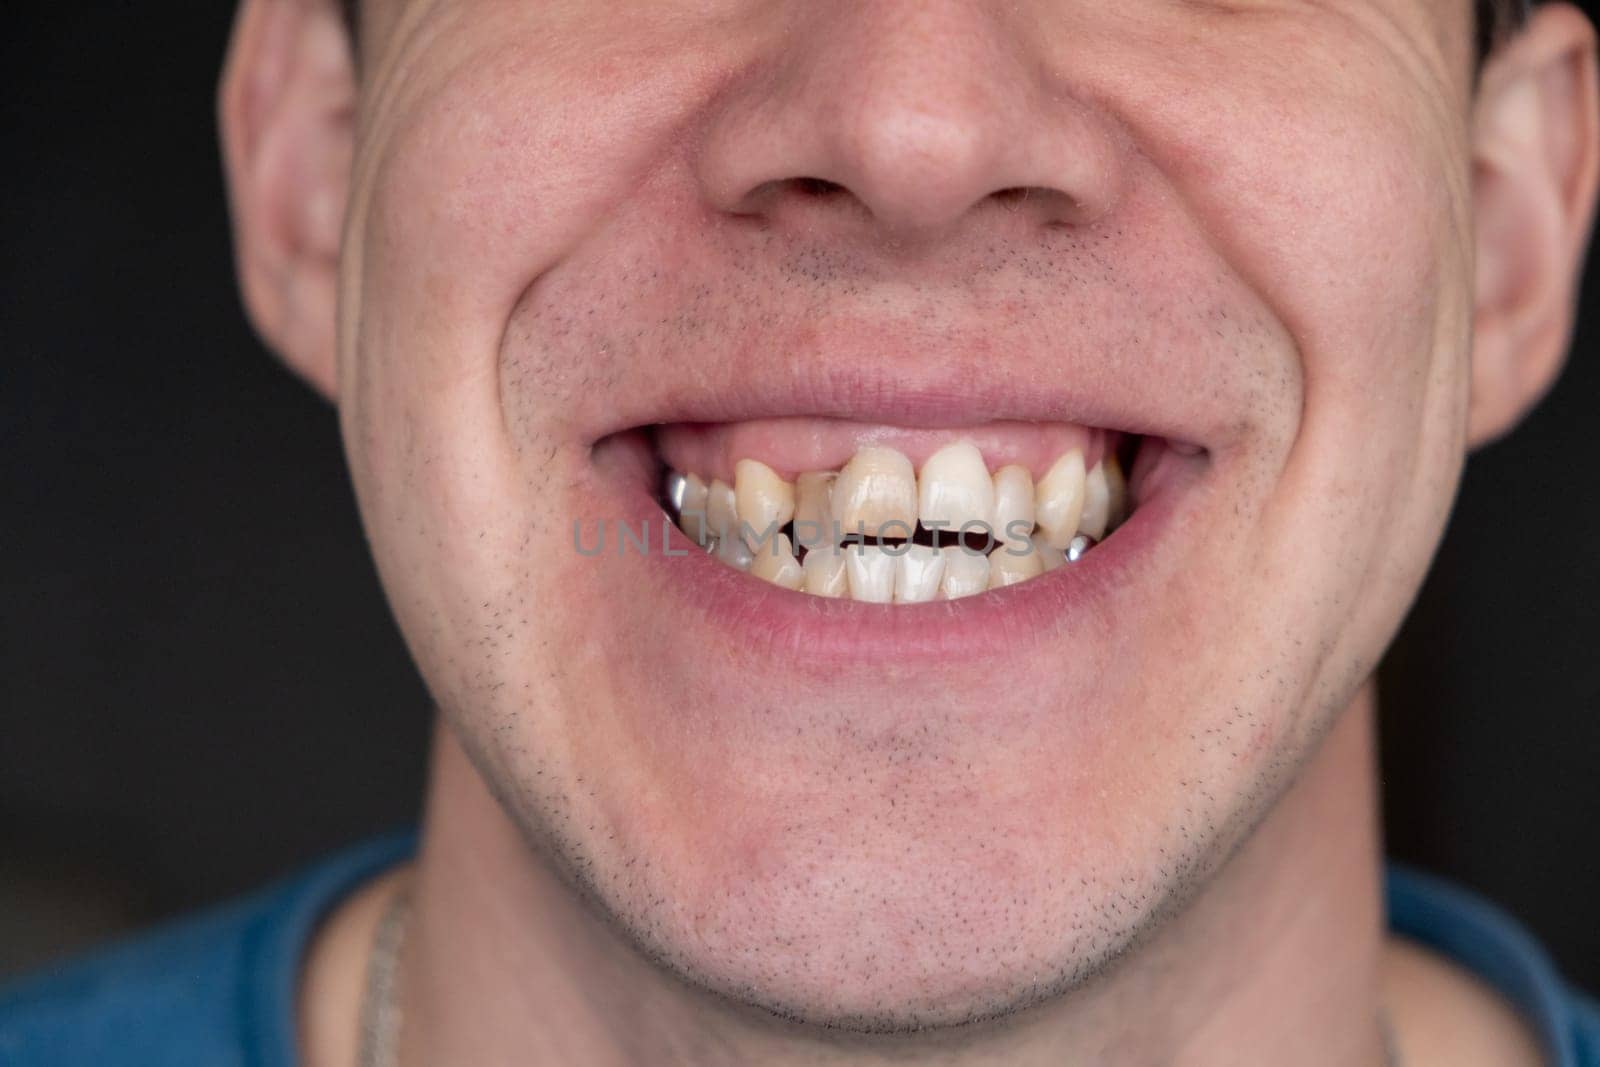 A man's crooked teeth. Young man showing crooked growing teeth. The man needs to go to the dentist to install braces.